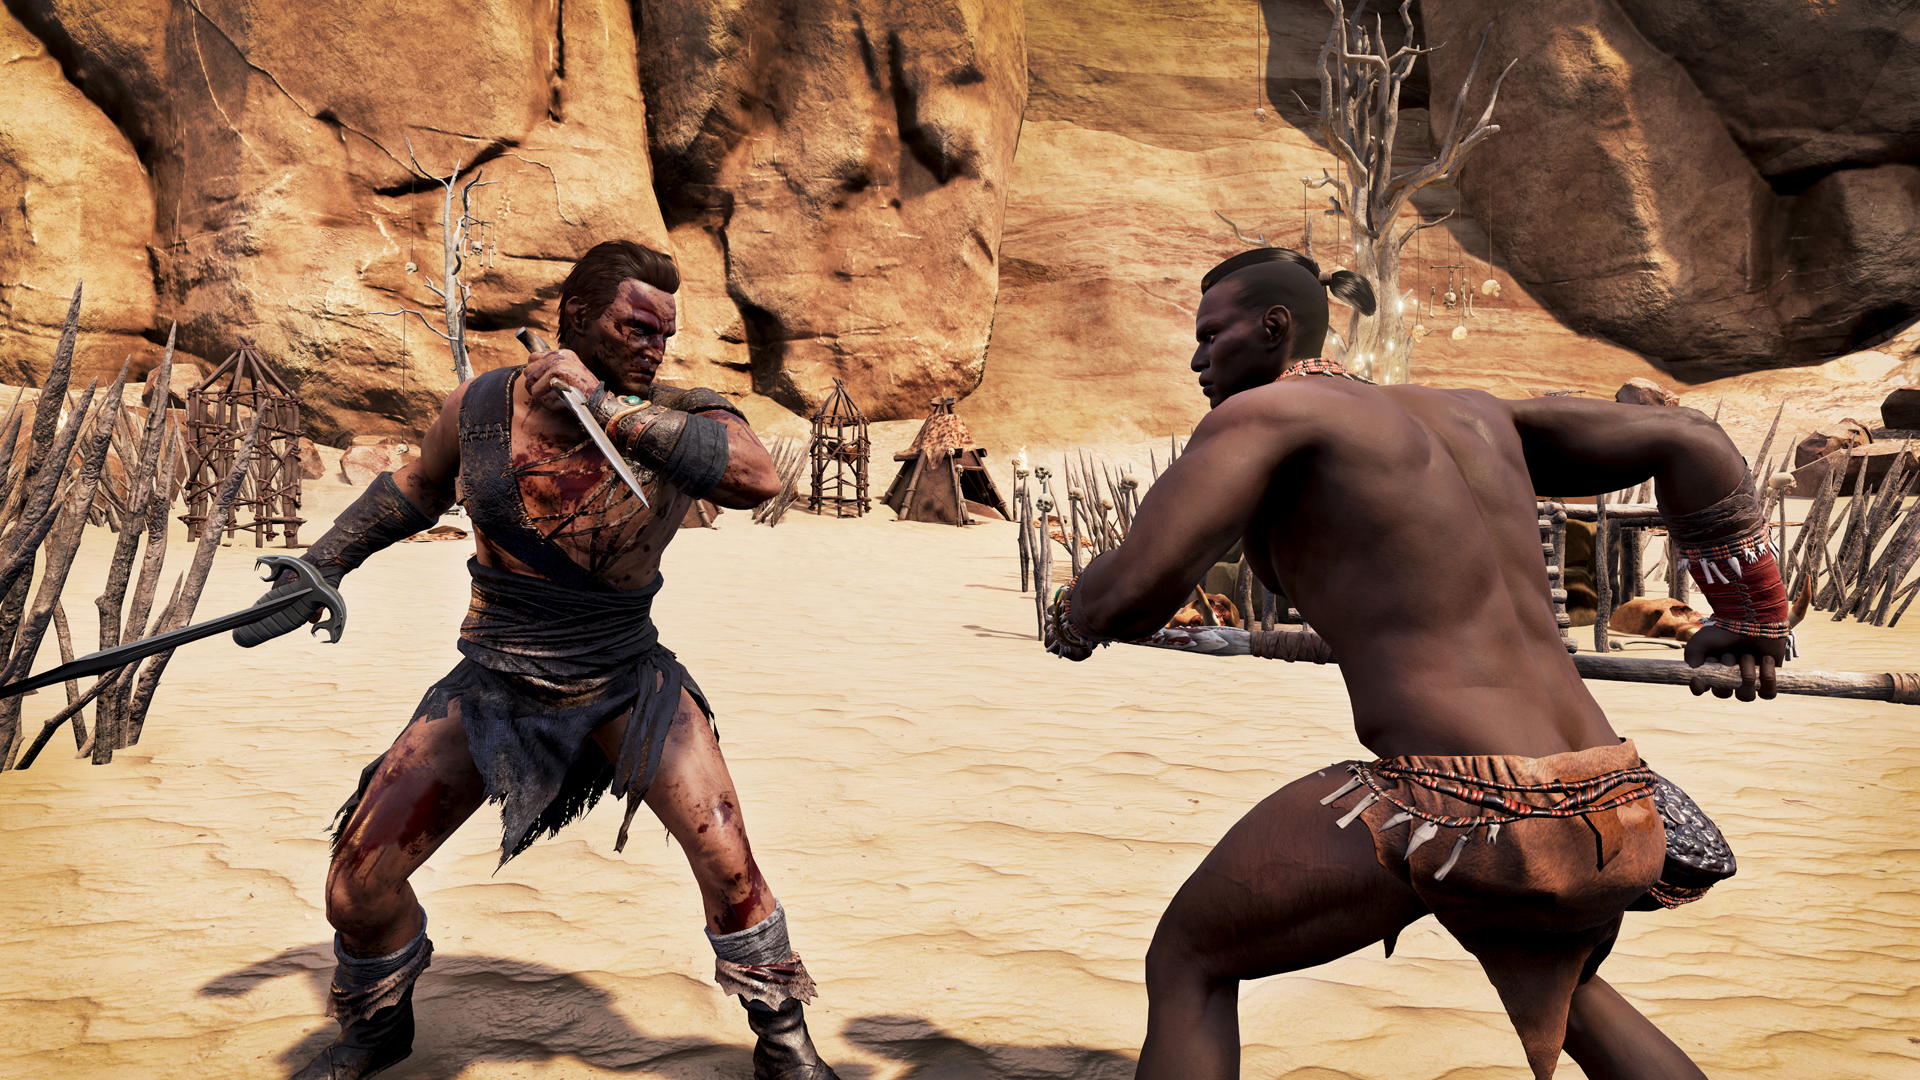 Video Game Conan Exiles HD Wallpaper | Background Image